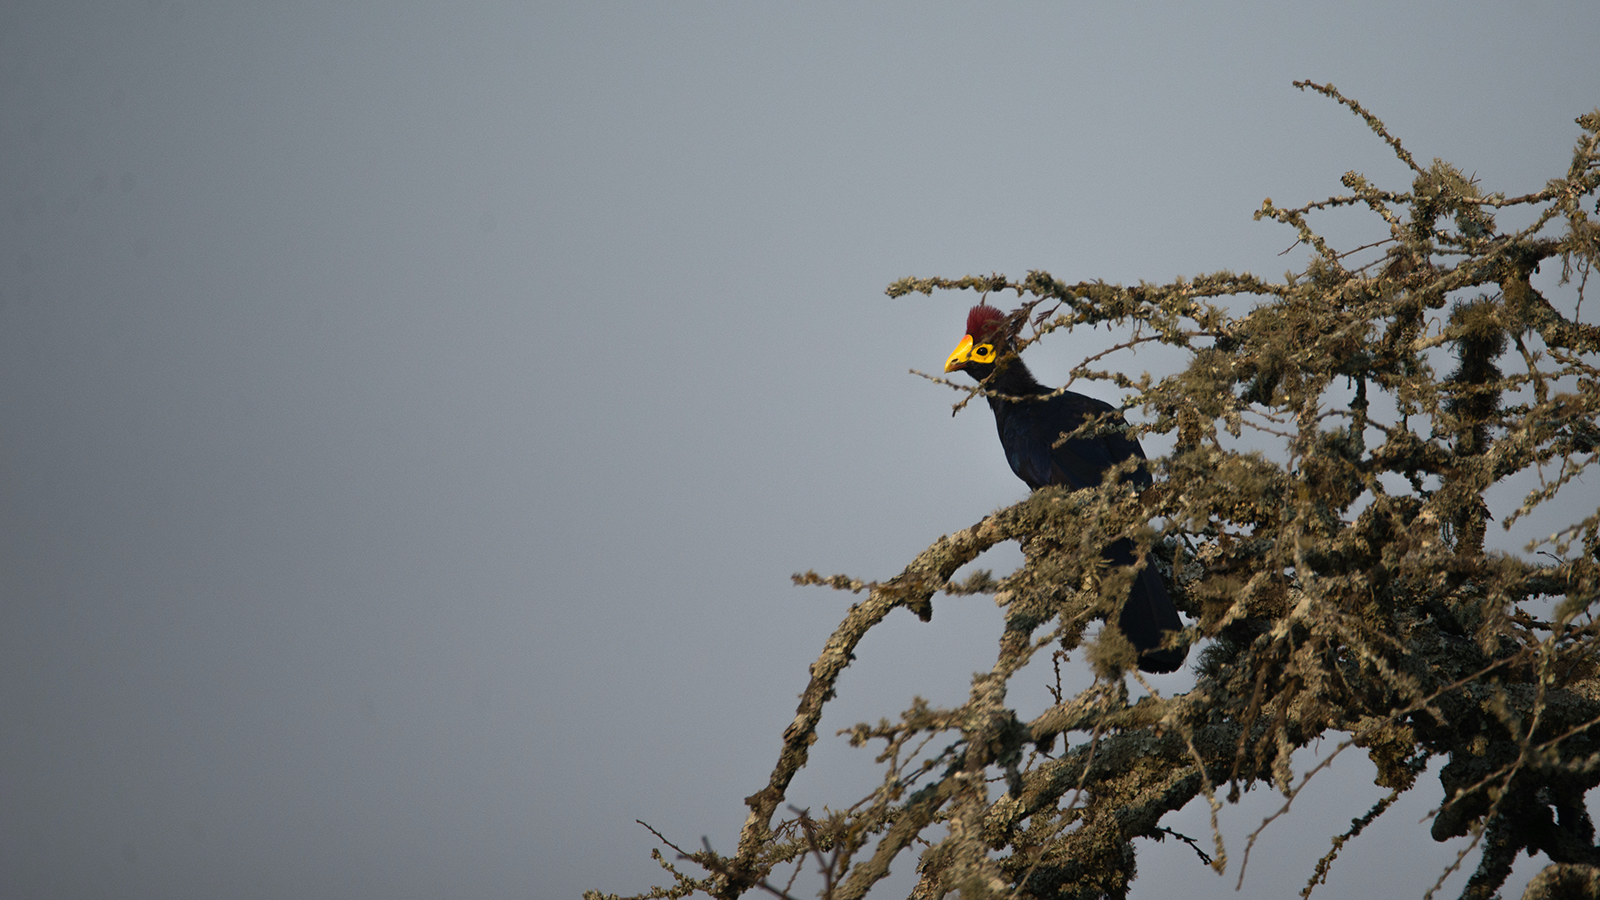 A rare sighting of a Ross' turaco seen in Lake Mburo National Park in Uganda